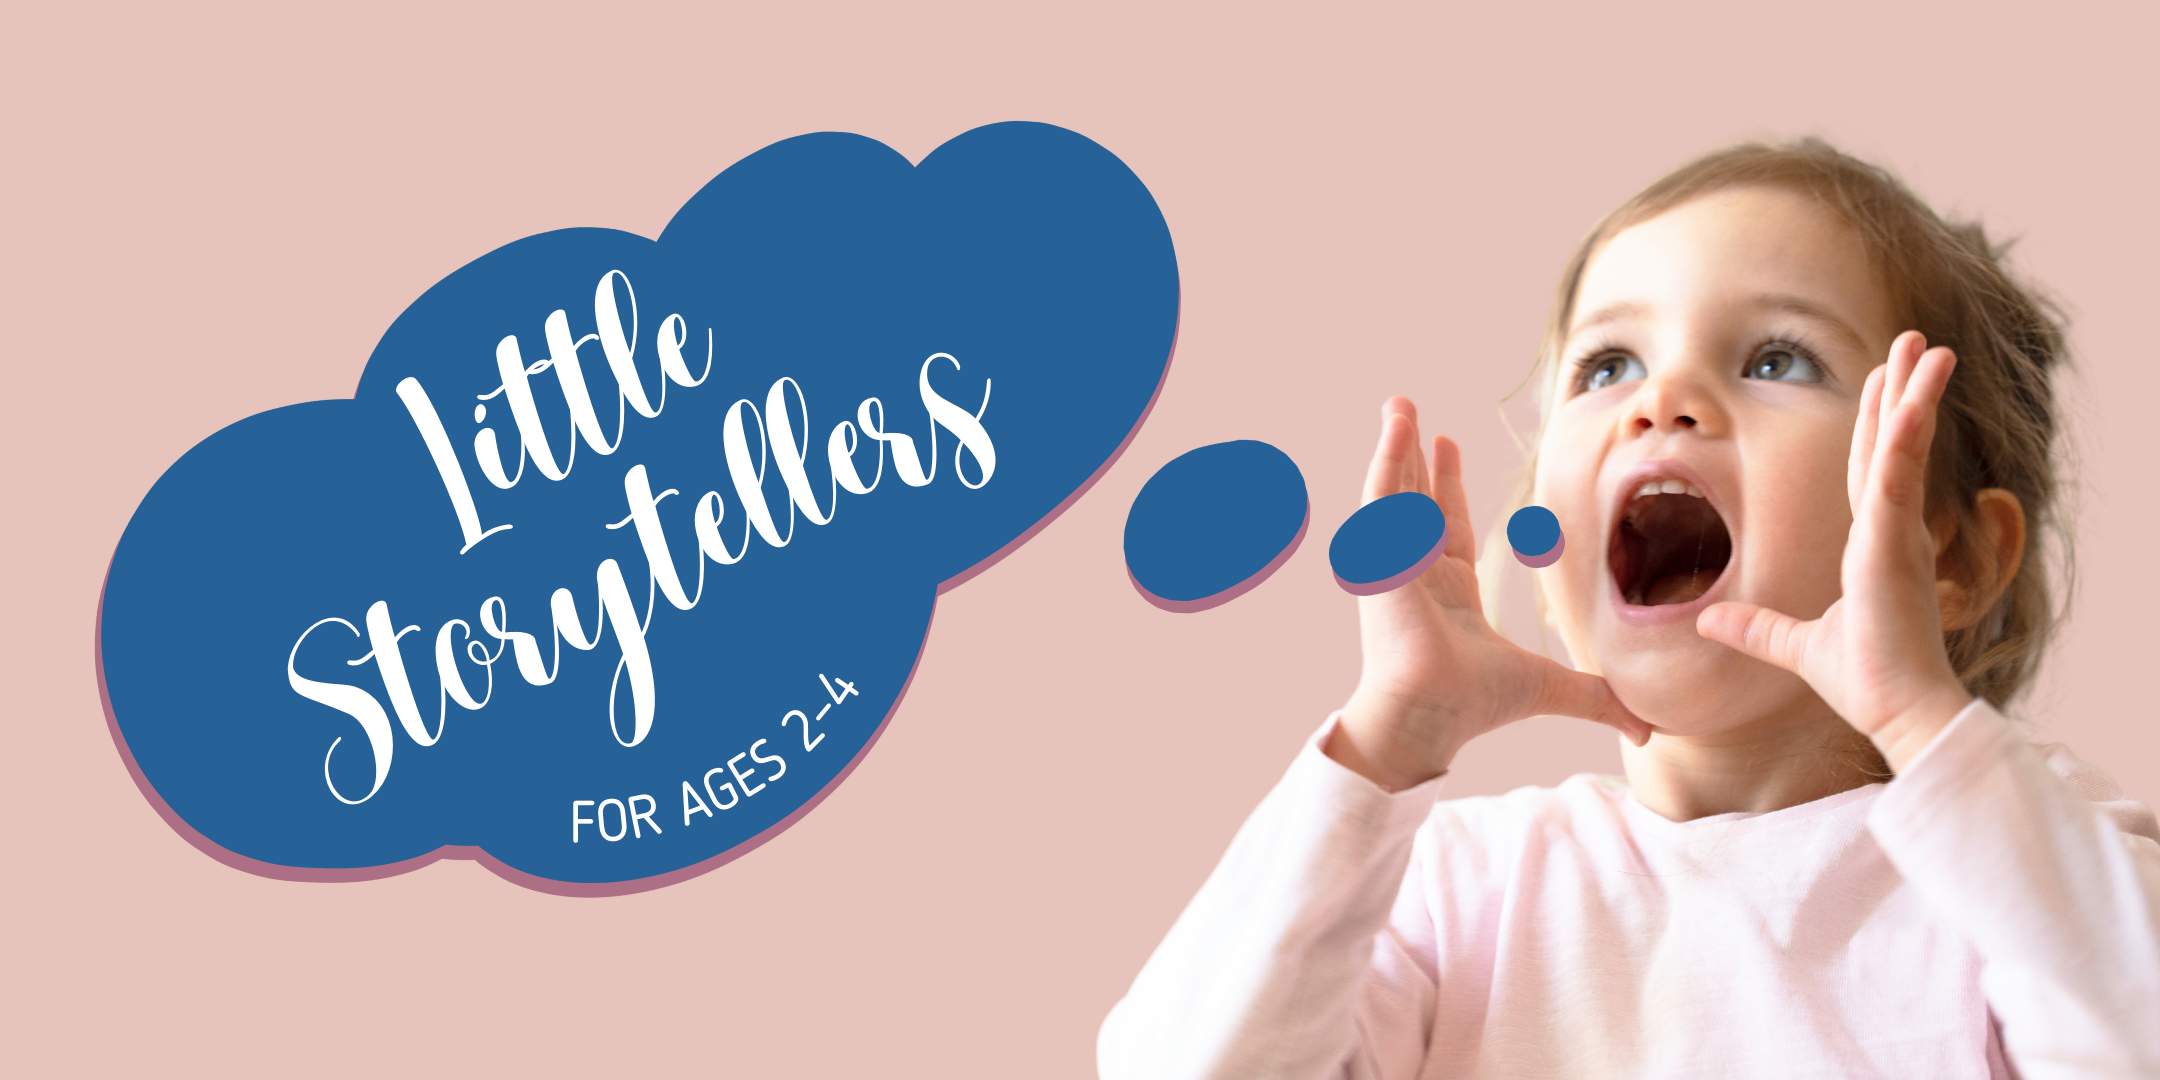 image of a little girl with her hands towards the sides of her mouth shouting and a blue word bubble with white text stating Little Storytellers for Ages 2–4